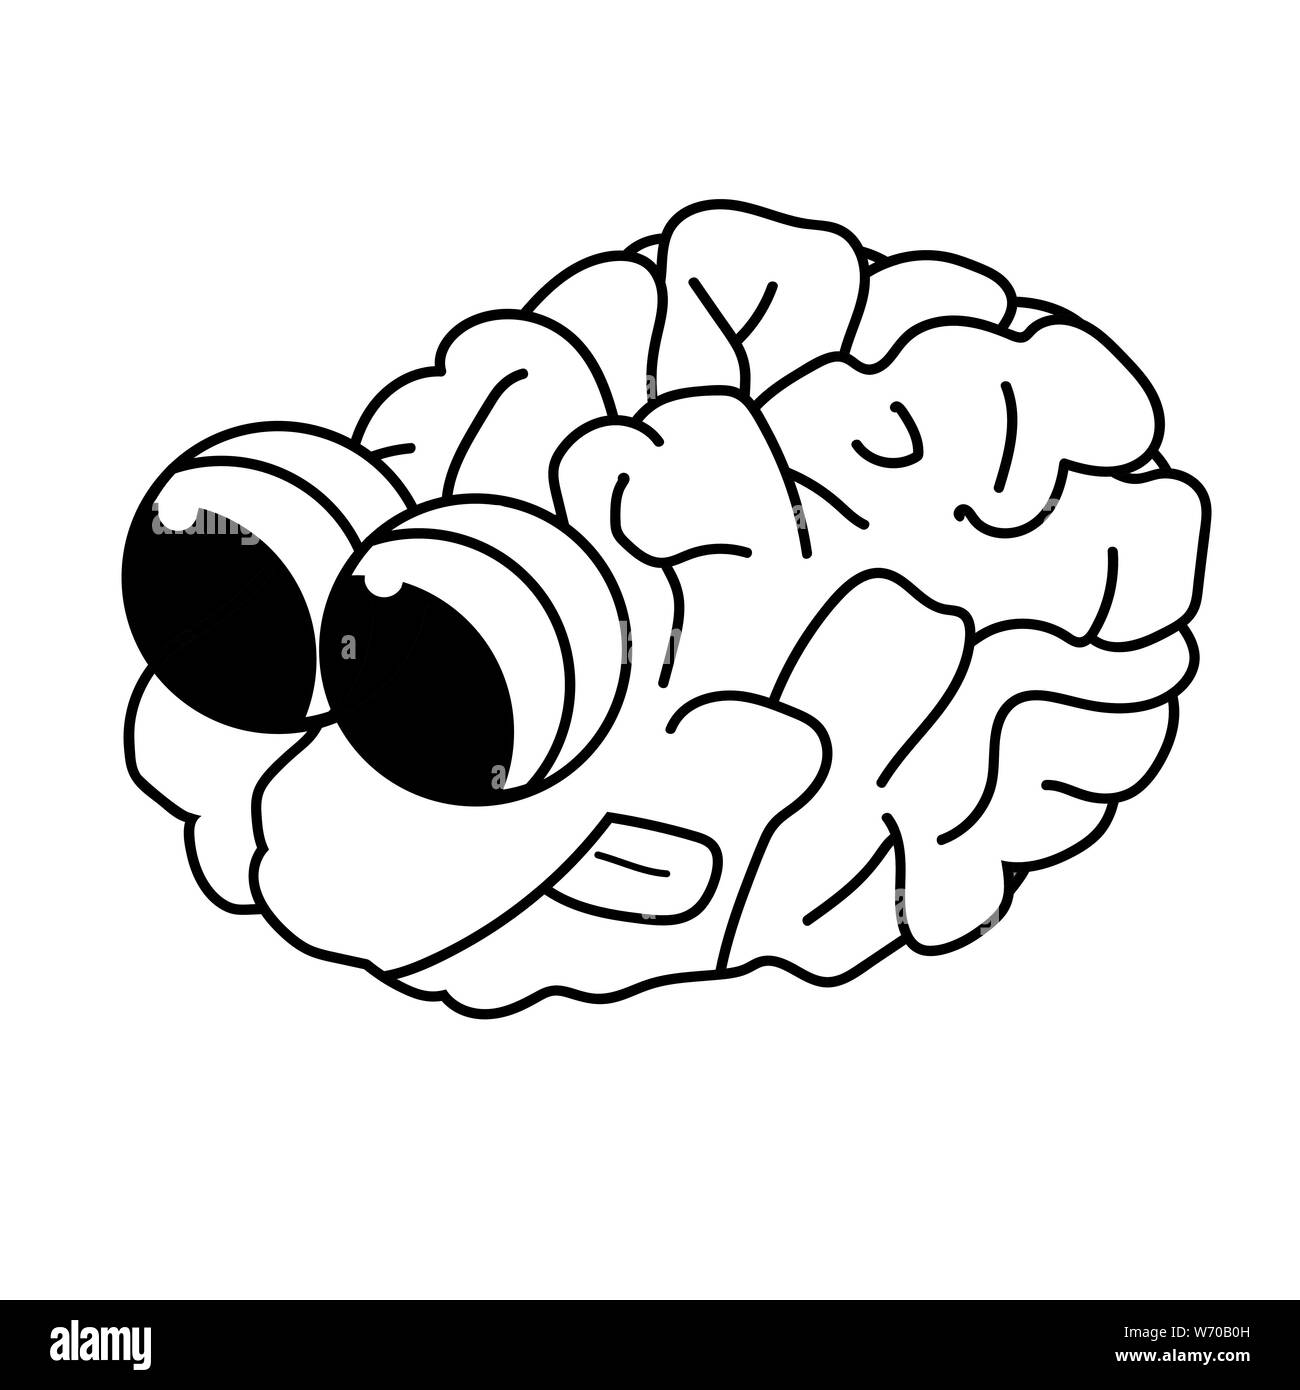 Cartoon Brain High Resolution Stock Photography And Images Alamy Download cartoon images and photos. https www alamy com ute purposeful cartoon brain isolated outline stock vector illustration image262466753 html